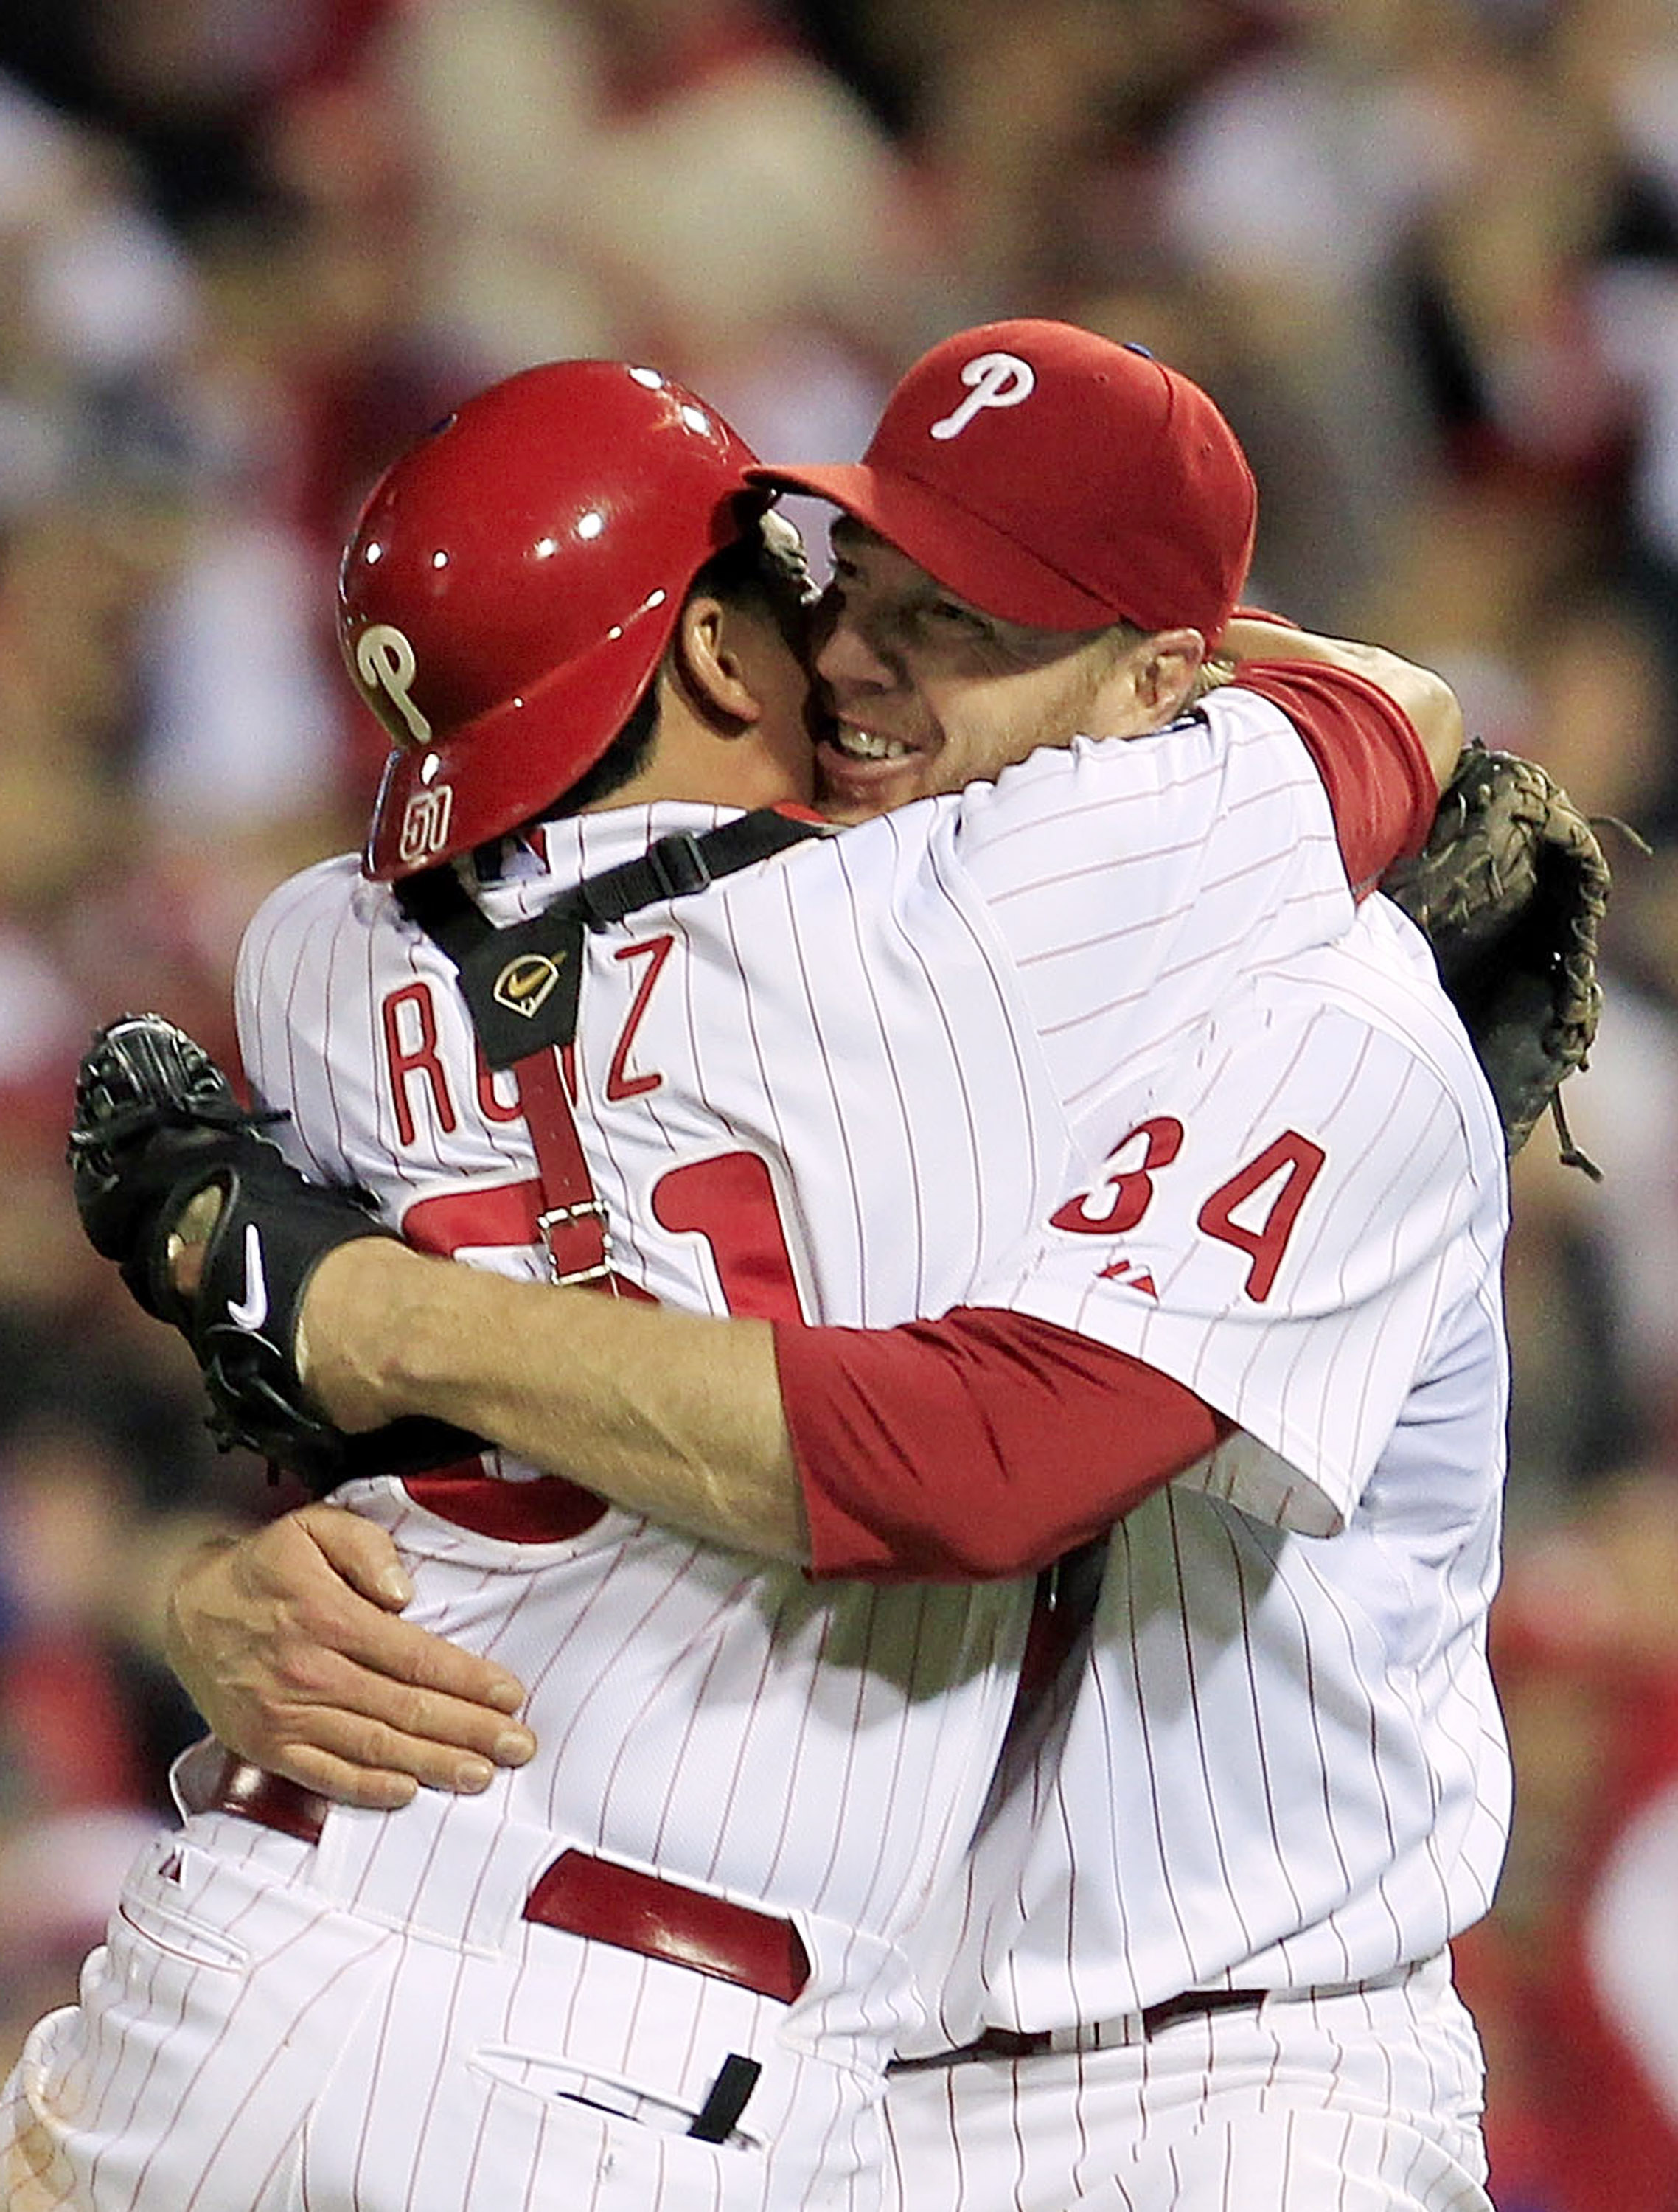 Halladay throws no-hitter in first postseason appearance